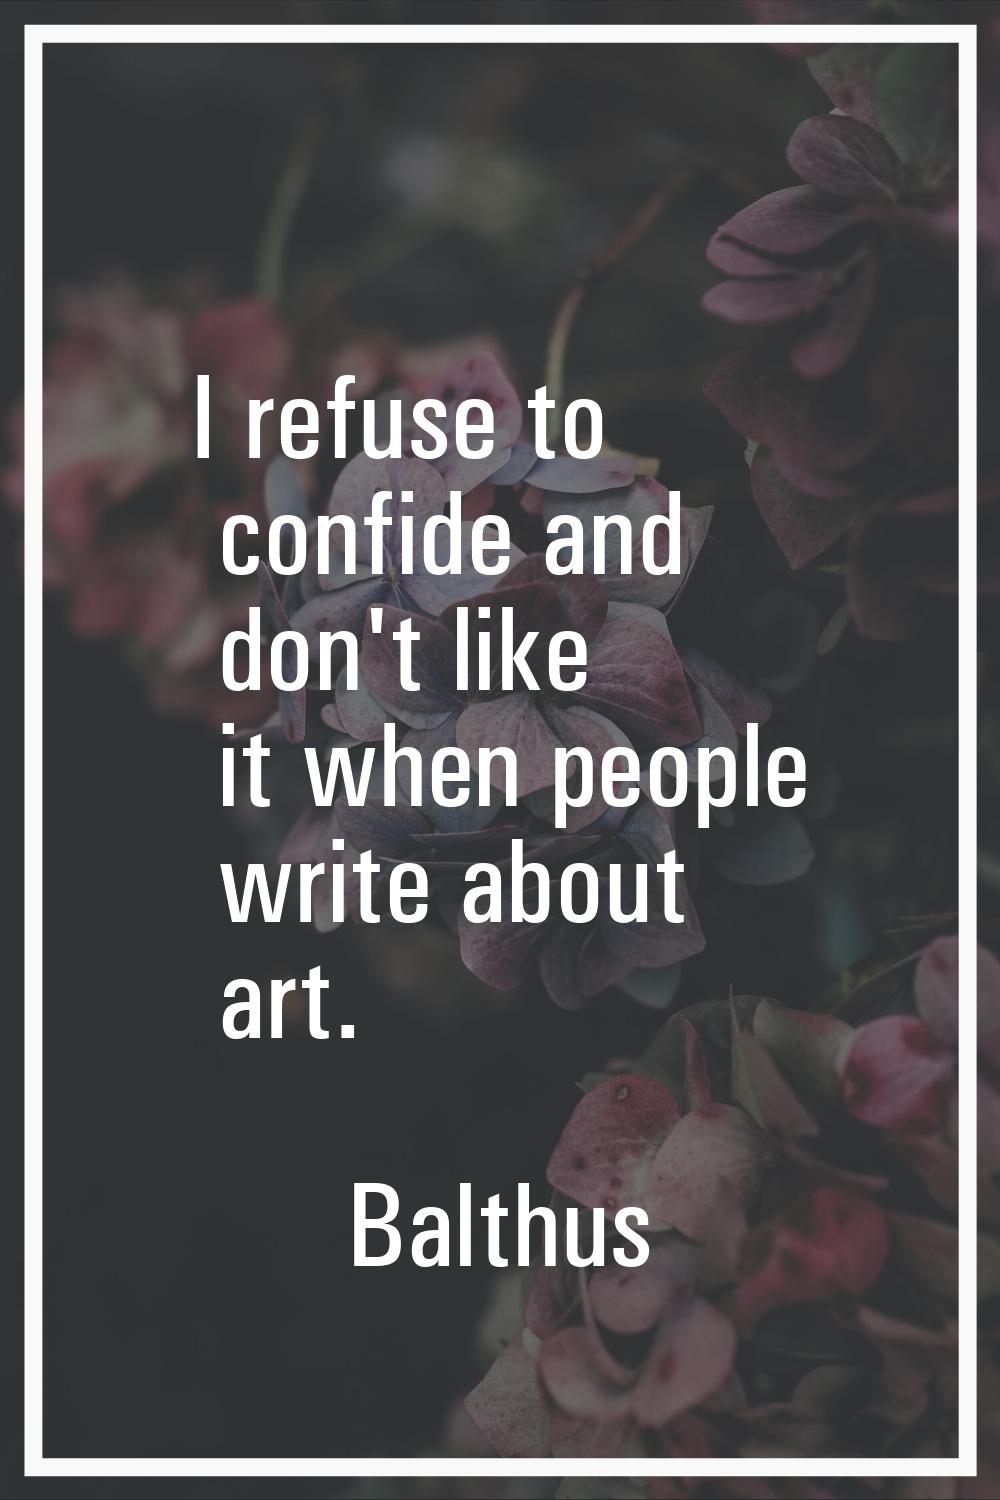 I refuse to confide and don't like it when people write about art.